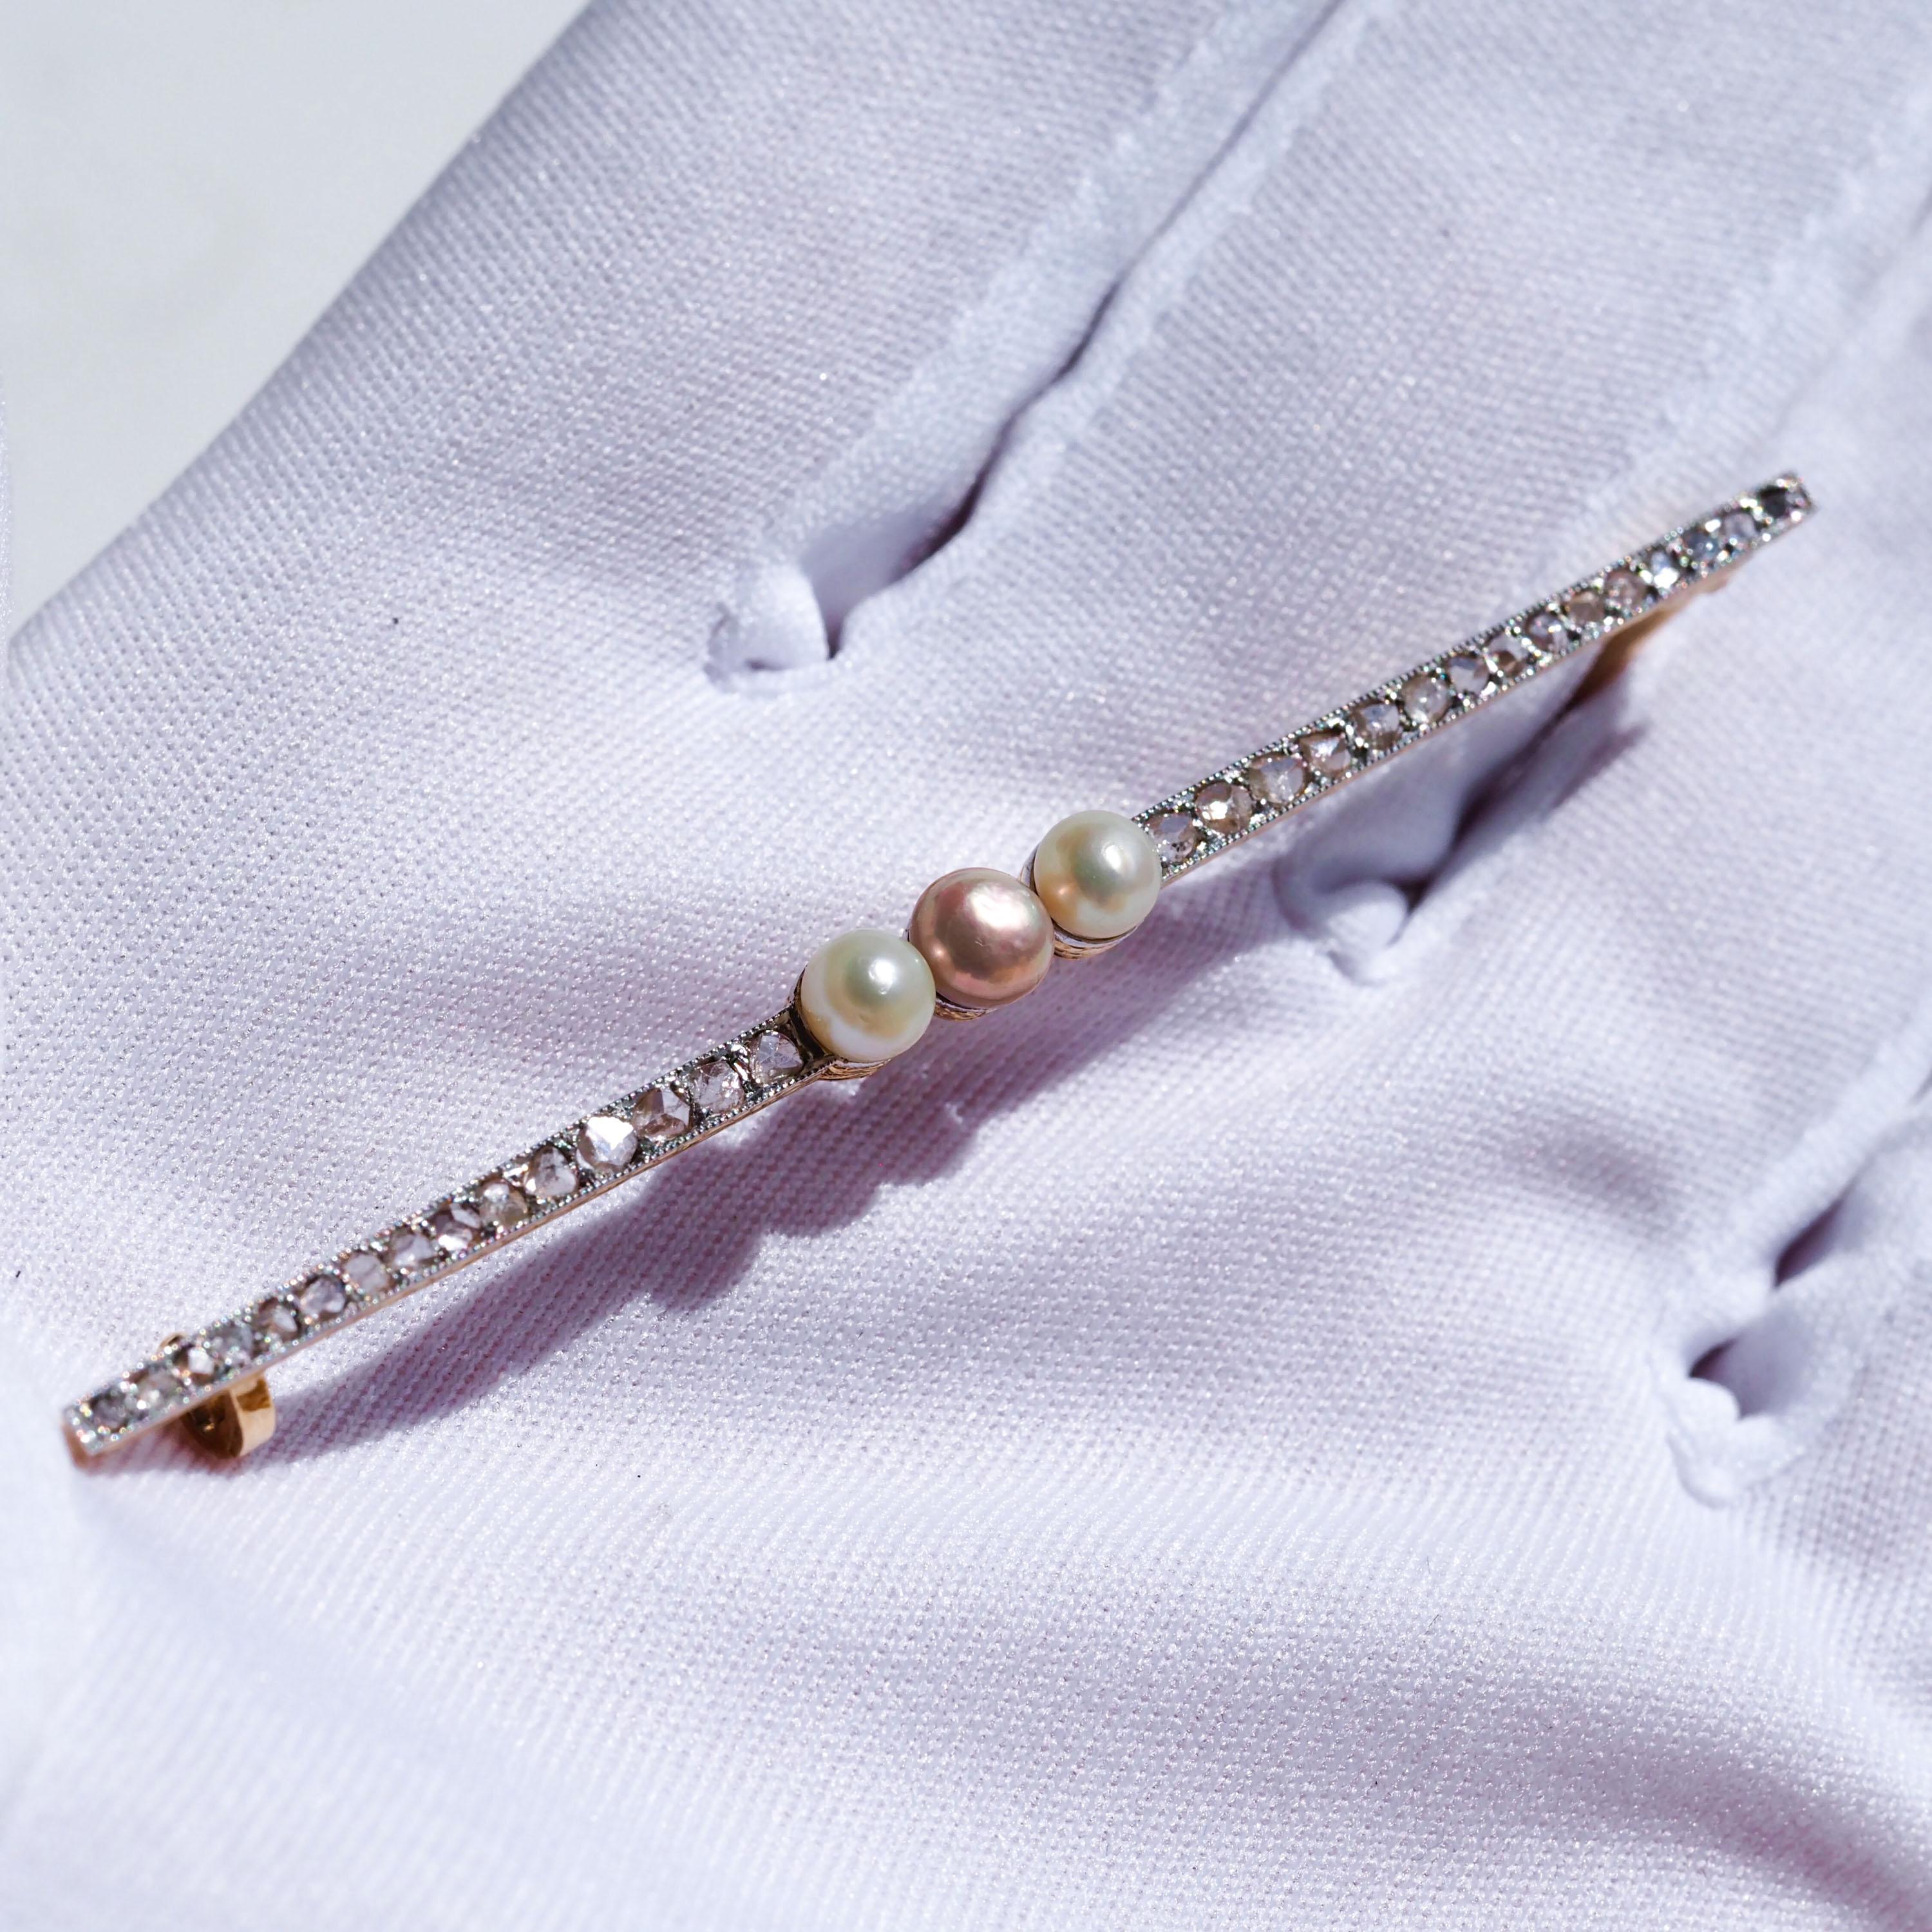 Antique 18ct Gold & Platinum Pink Pearl & Diamond Brooch - c.1920 For Sale 8